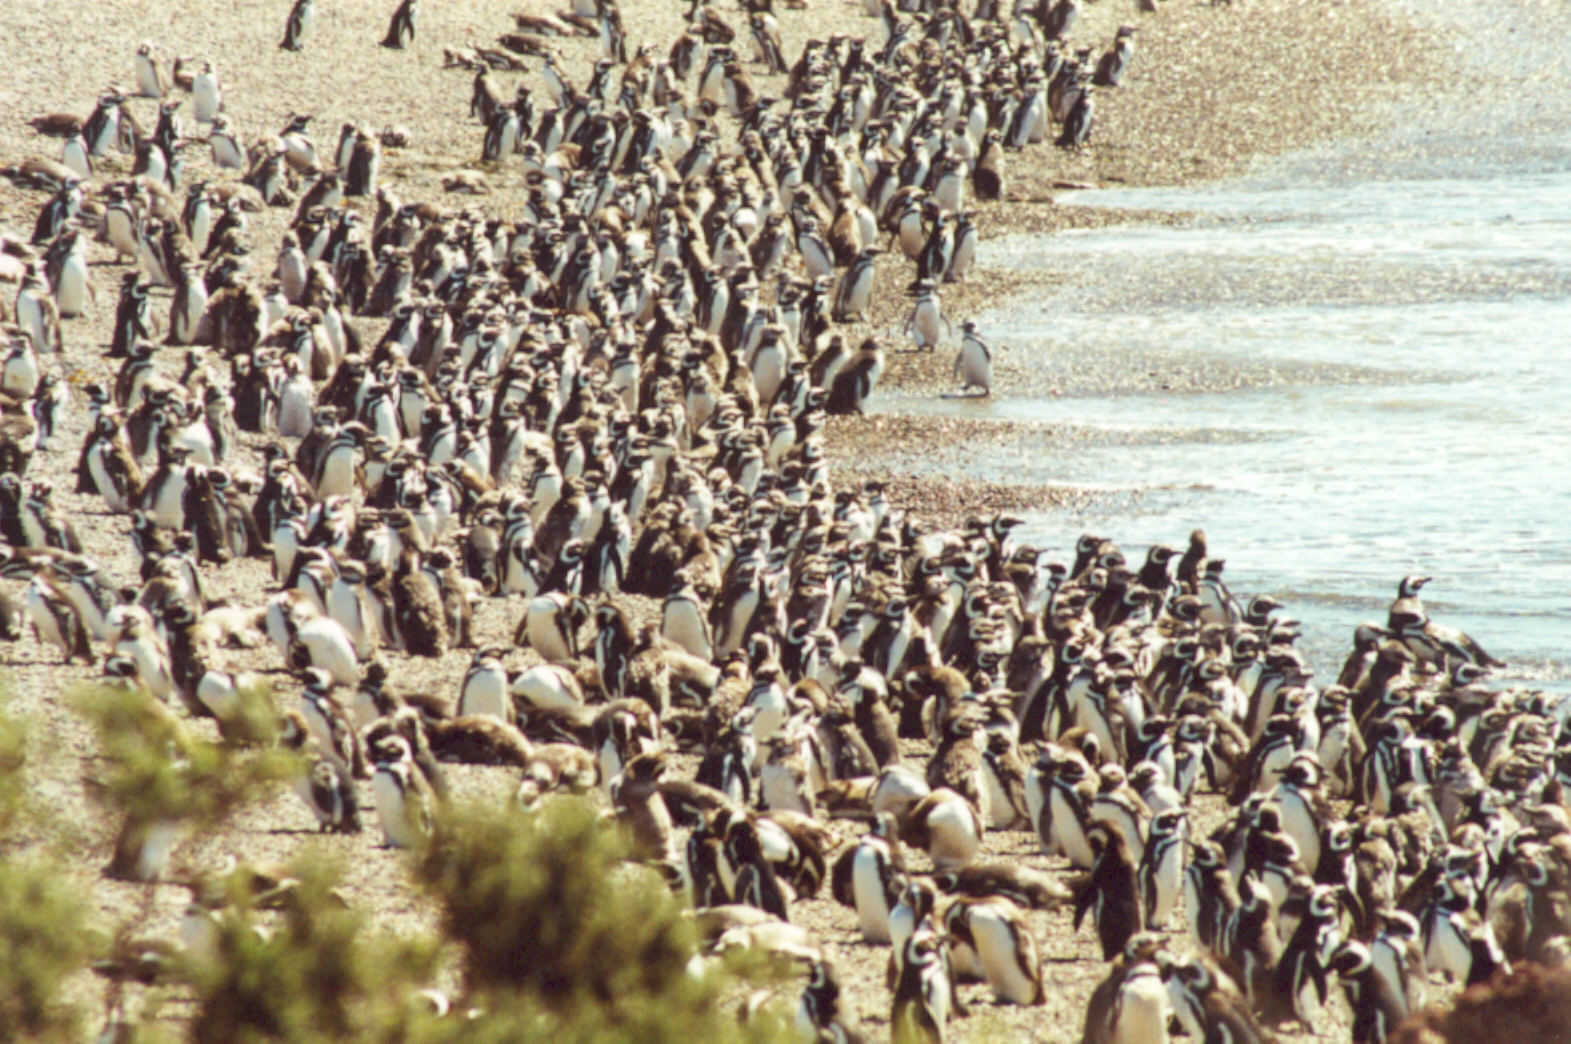 A flock of penguins crowd the beach